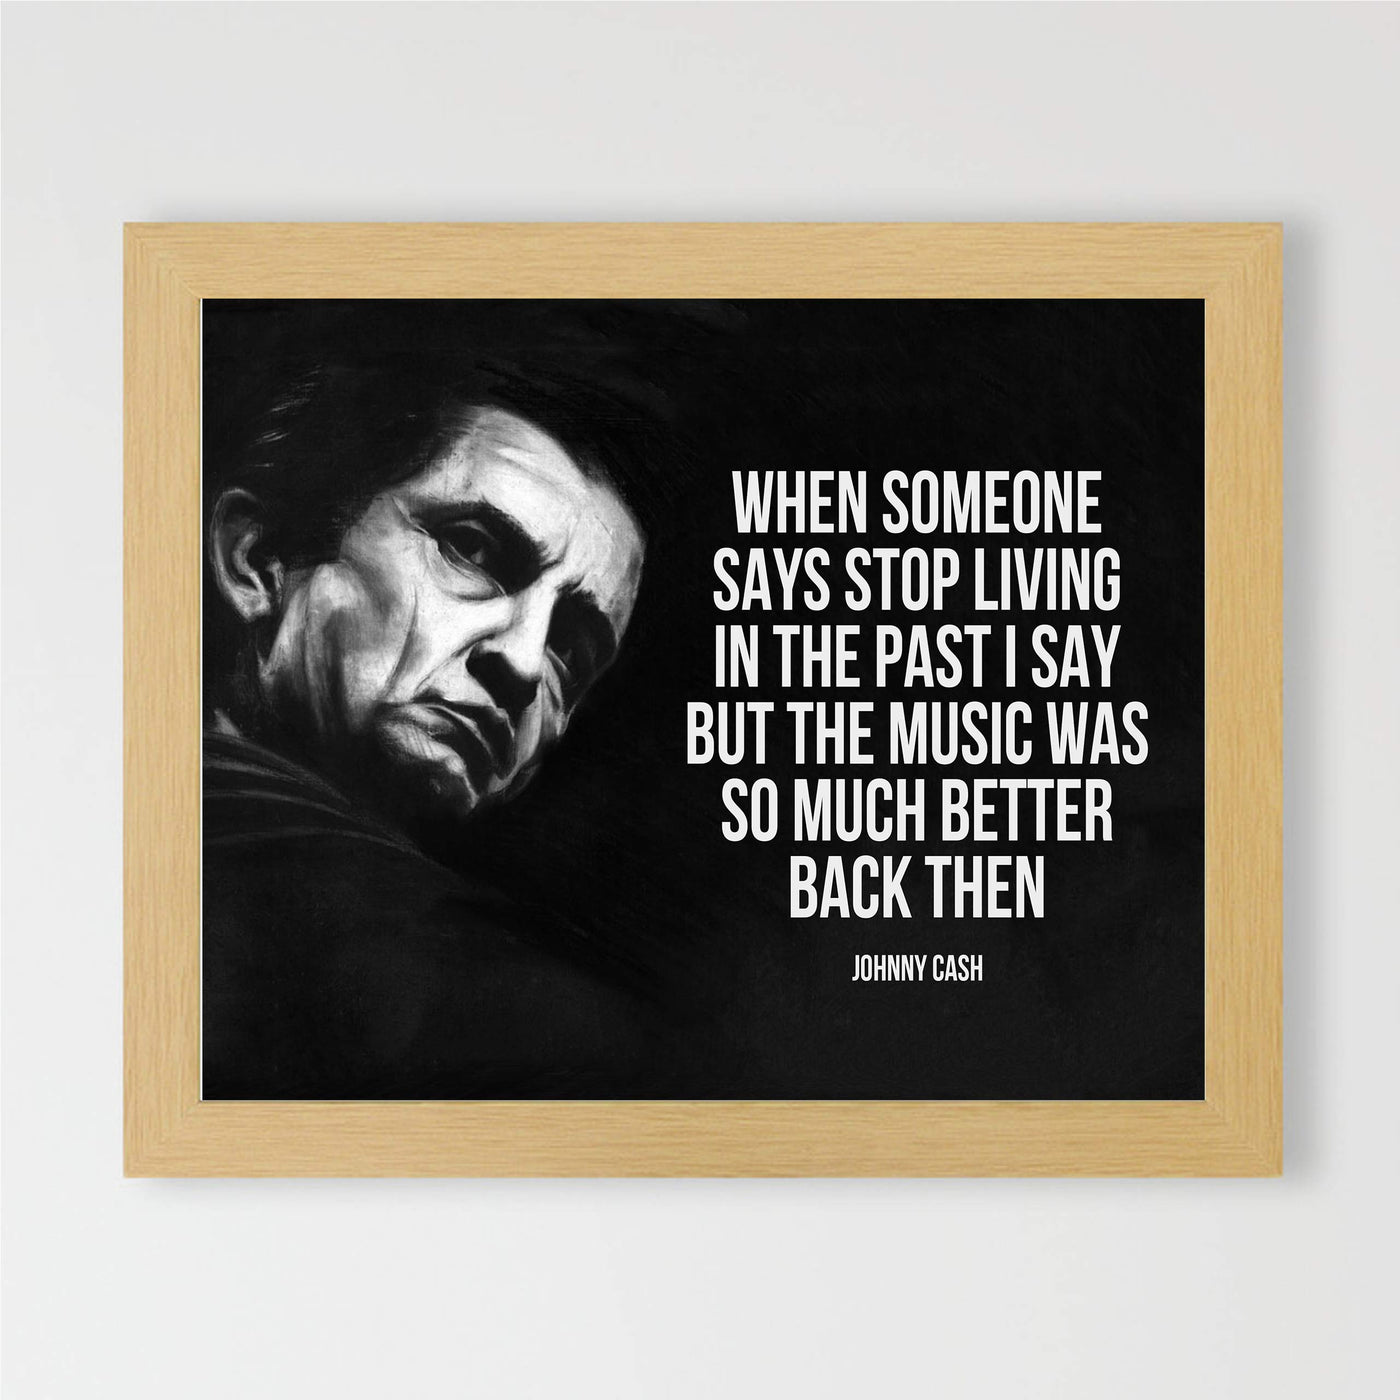 Johnny Cash Quotes-"Music Was So Much Better Back Then"-Inspirational Country Music Wall Art Sign -10x8" Silhouette Poster Print -Ready to Frame. Home-Studio-Bar-Dorm-Cave Decor. Great Gift for Fans!